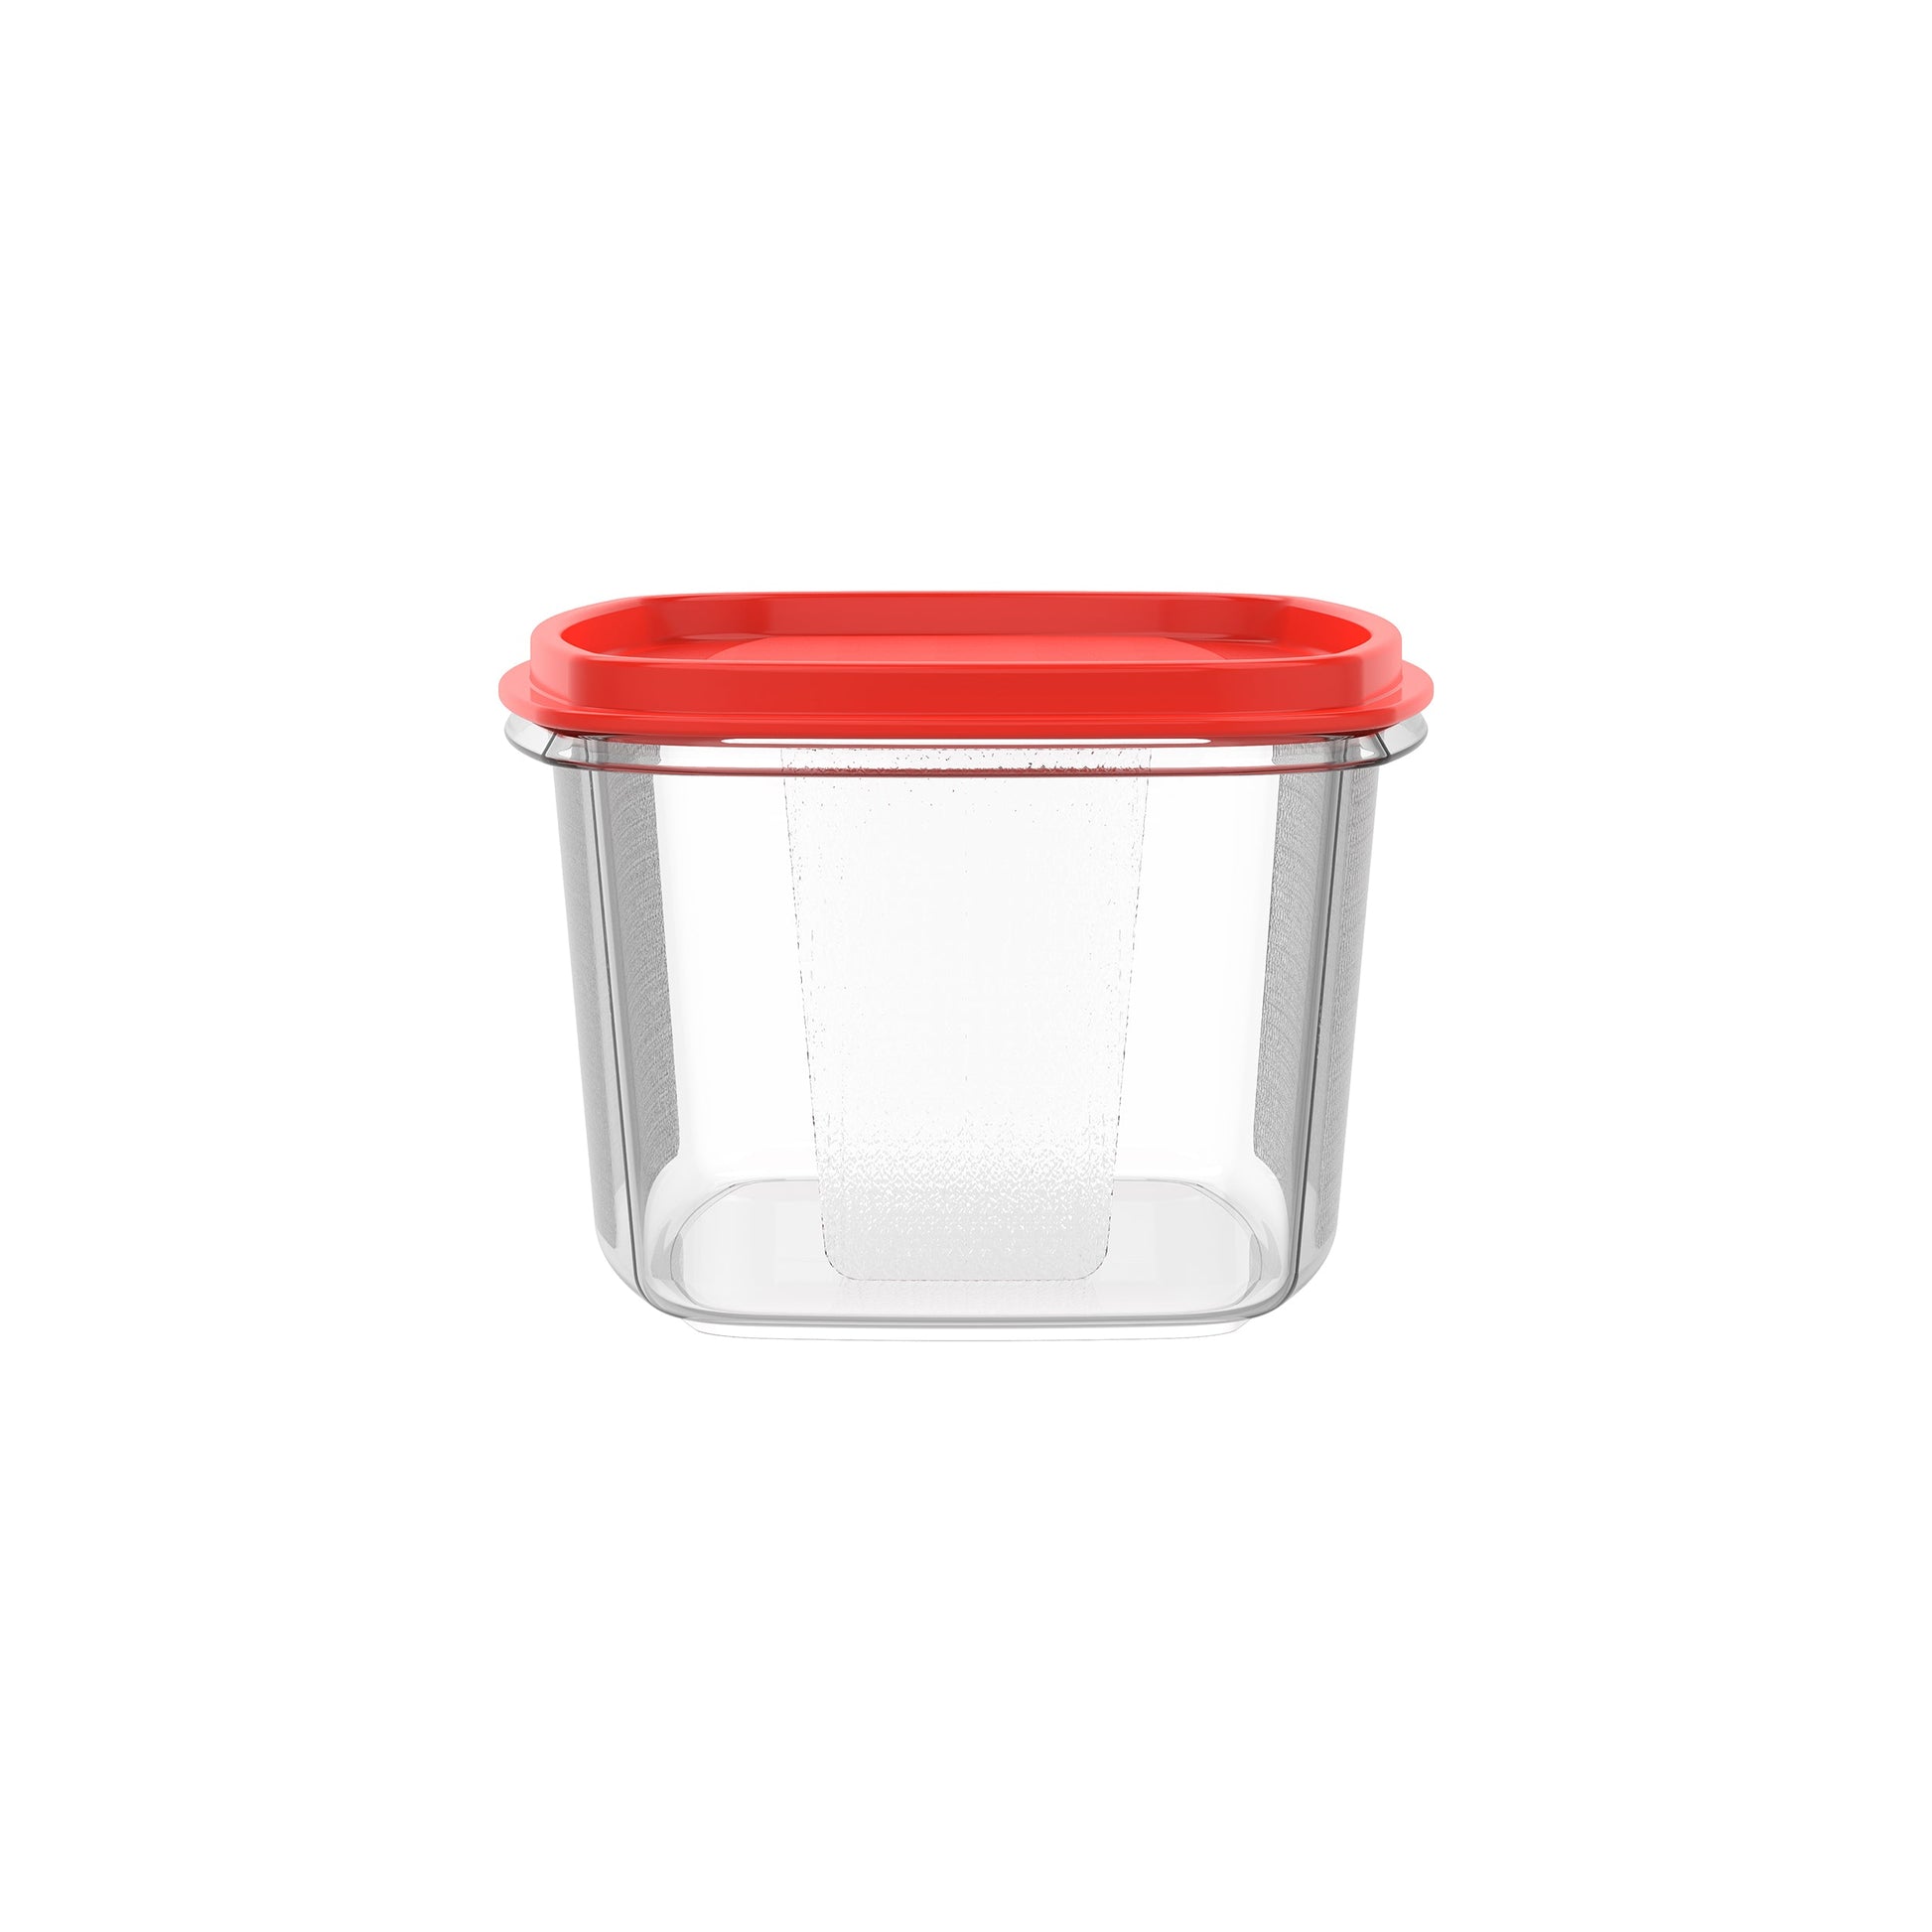 Oval Food Storage Containers Pack - Cosmoplast Kuwait